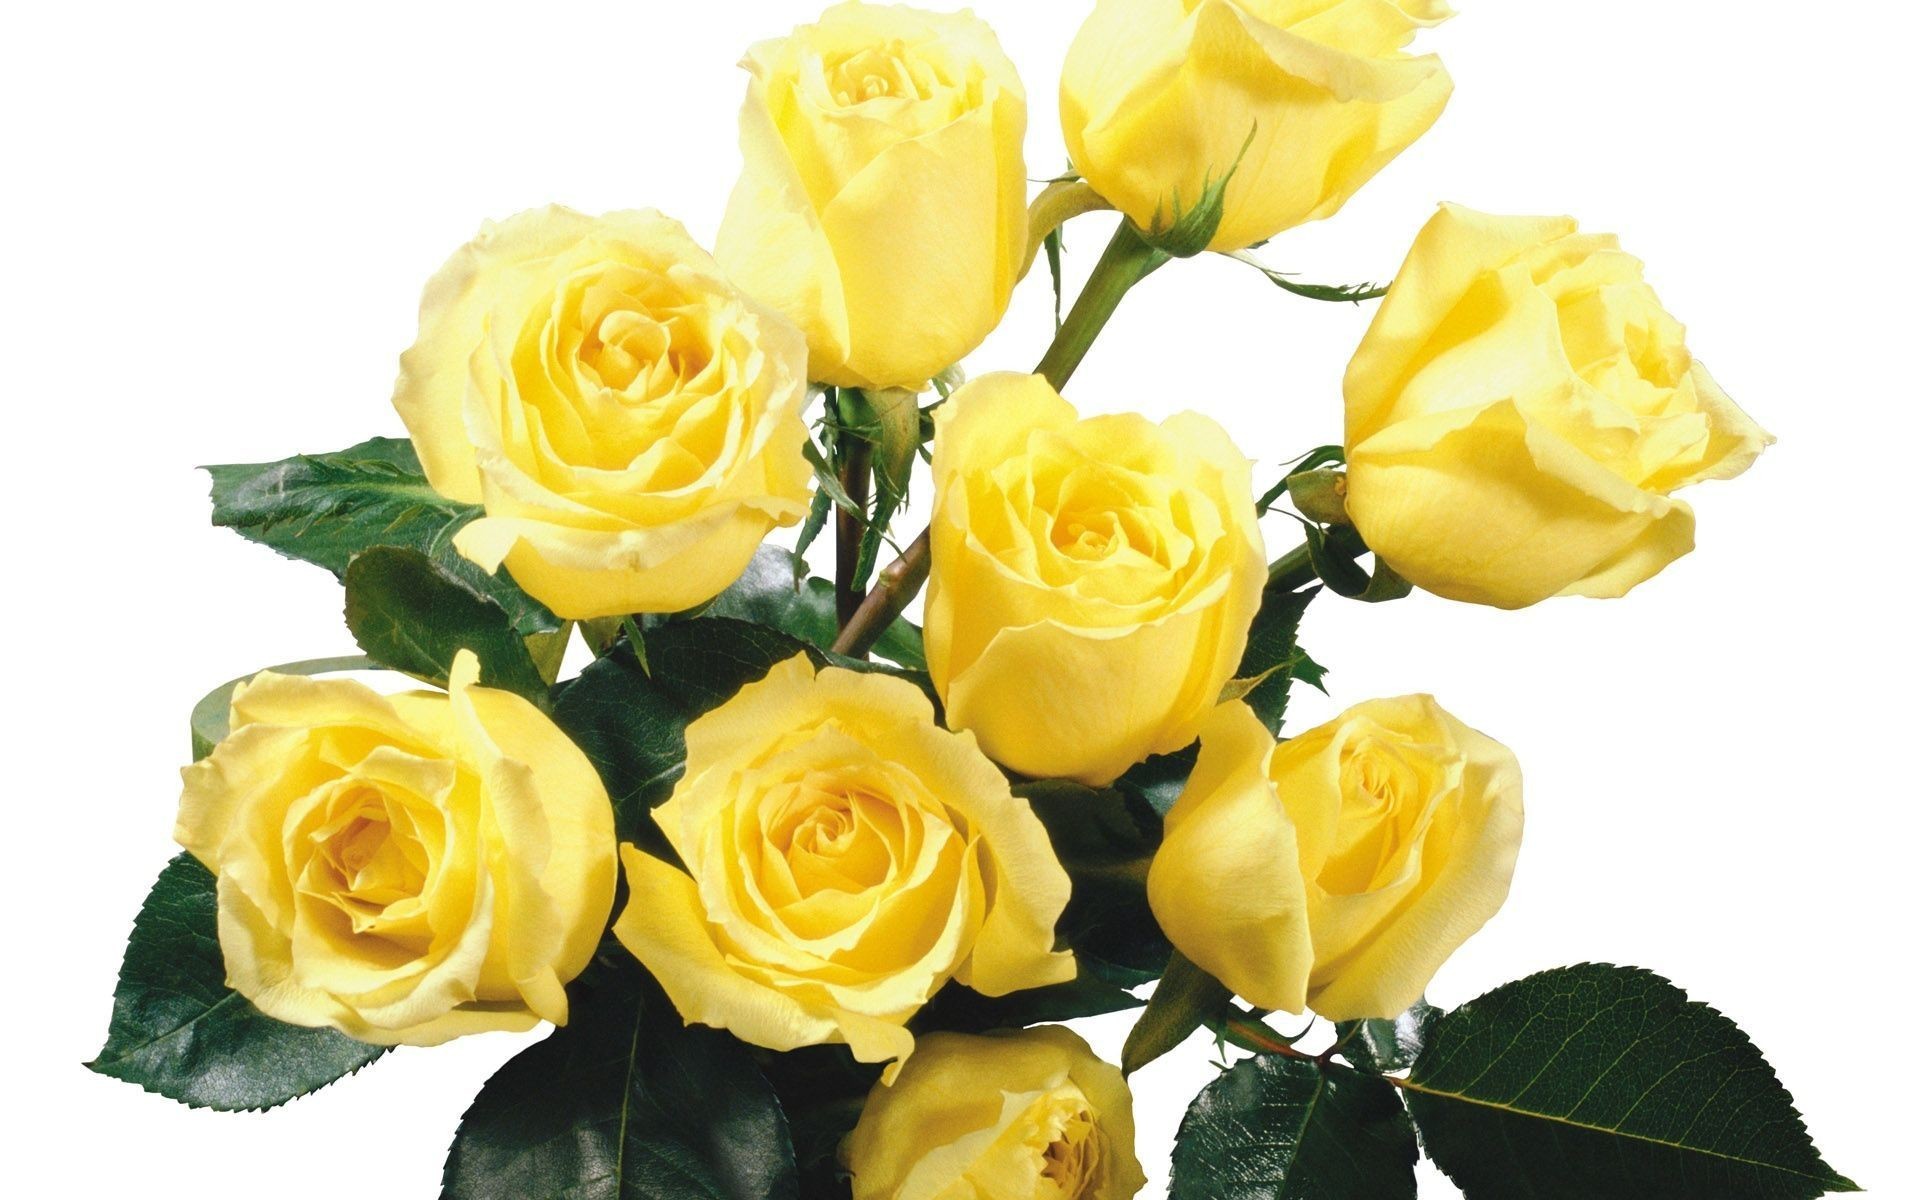 1920x1200  Yellow Rose Flower Wallpapers - Wallpaper Cave Â· 0 Â· Download Â·  Res: 1920x1080,